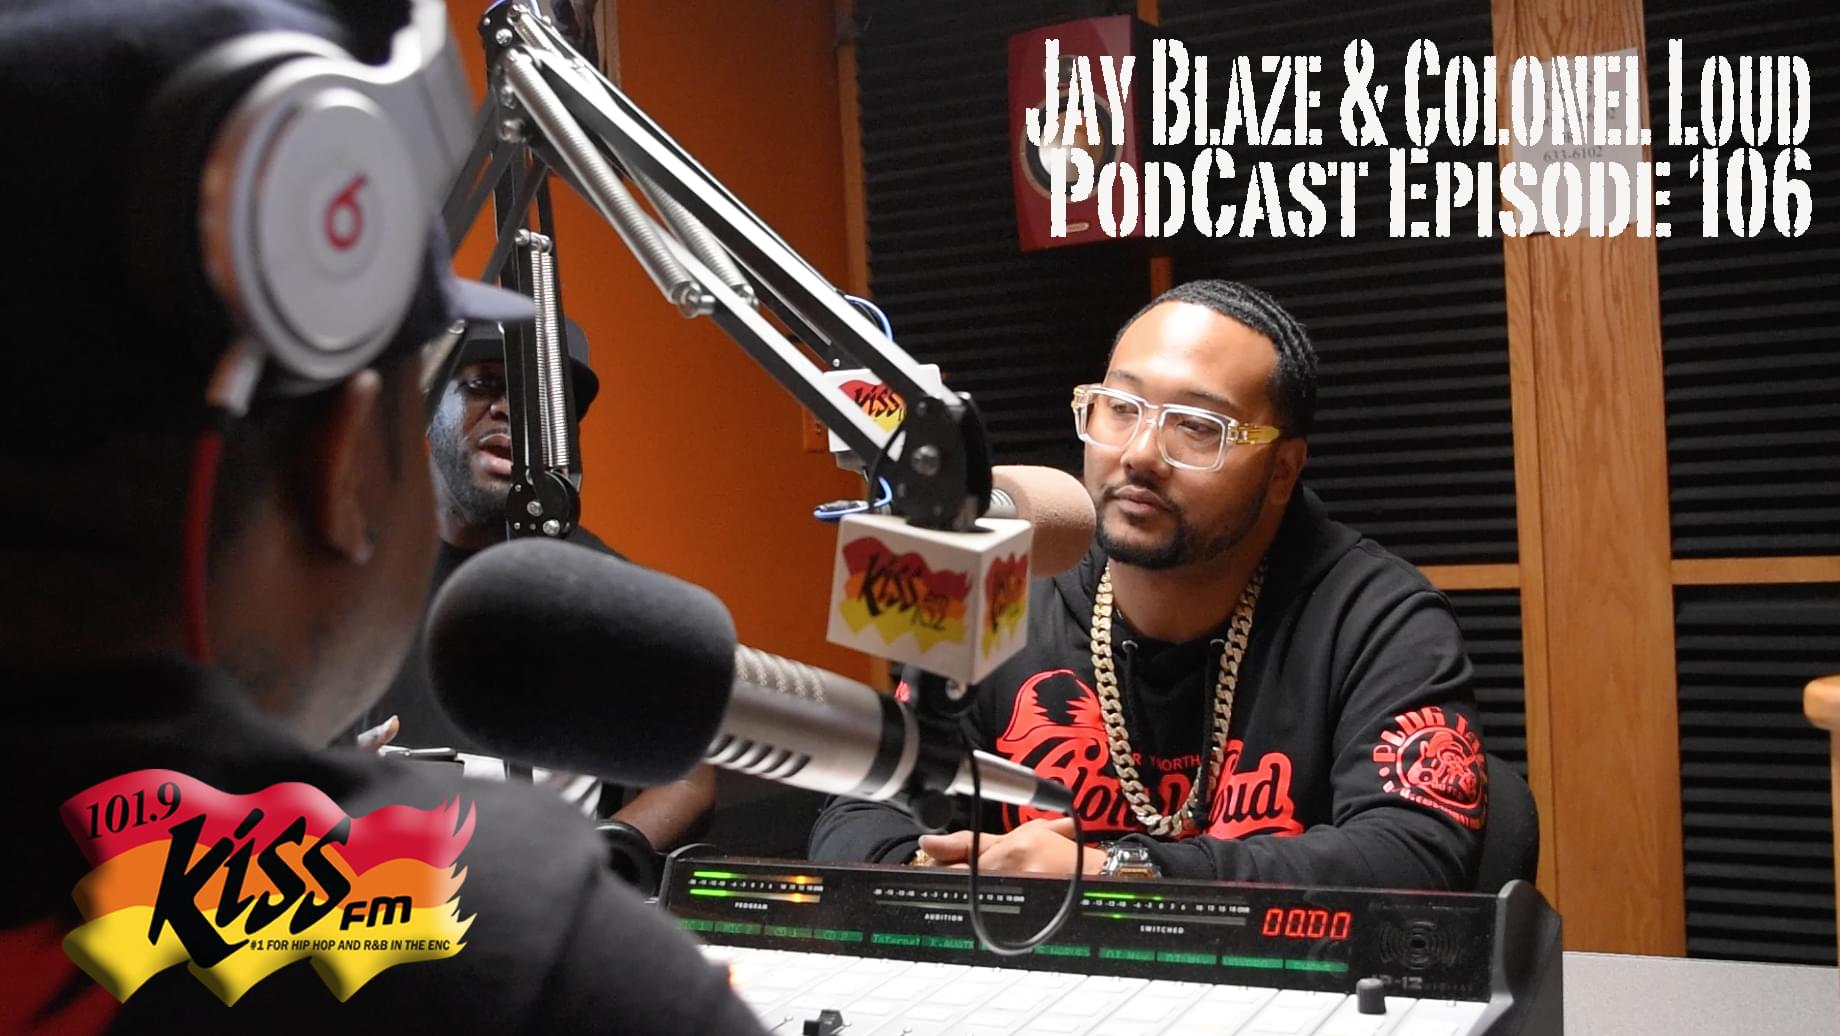 Colonel Loud And Jay Blaze PodCast Episode 106 “New Old School Music”